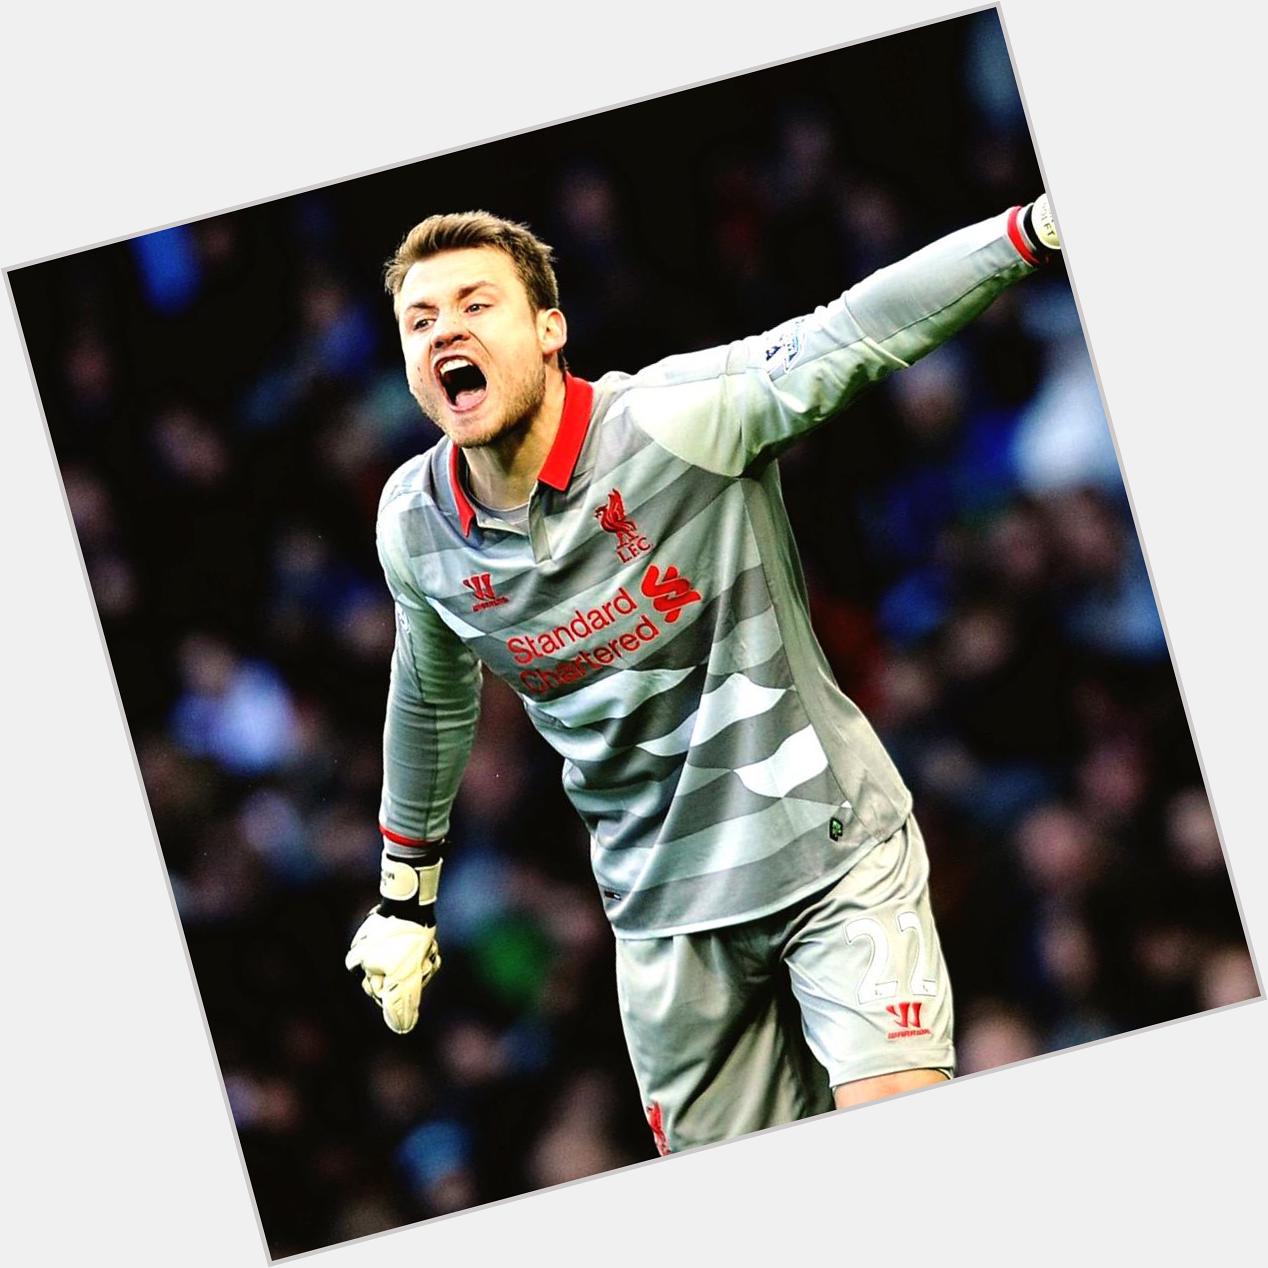 Happy Birthday to Simon Mignolet! 27 today. Enjoy your day and keep up the good work!  